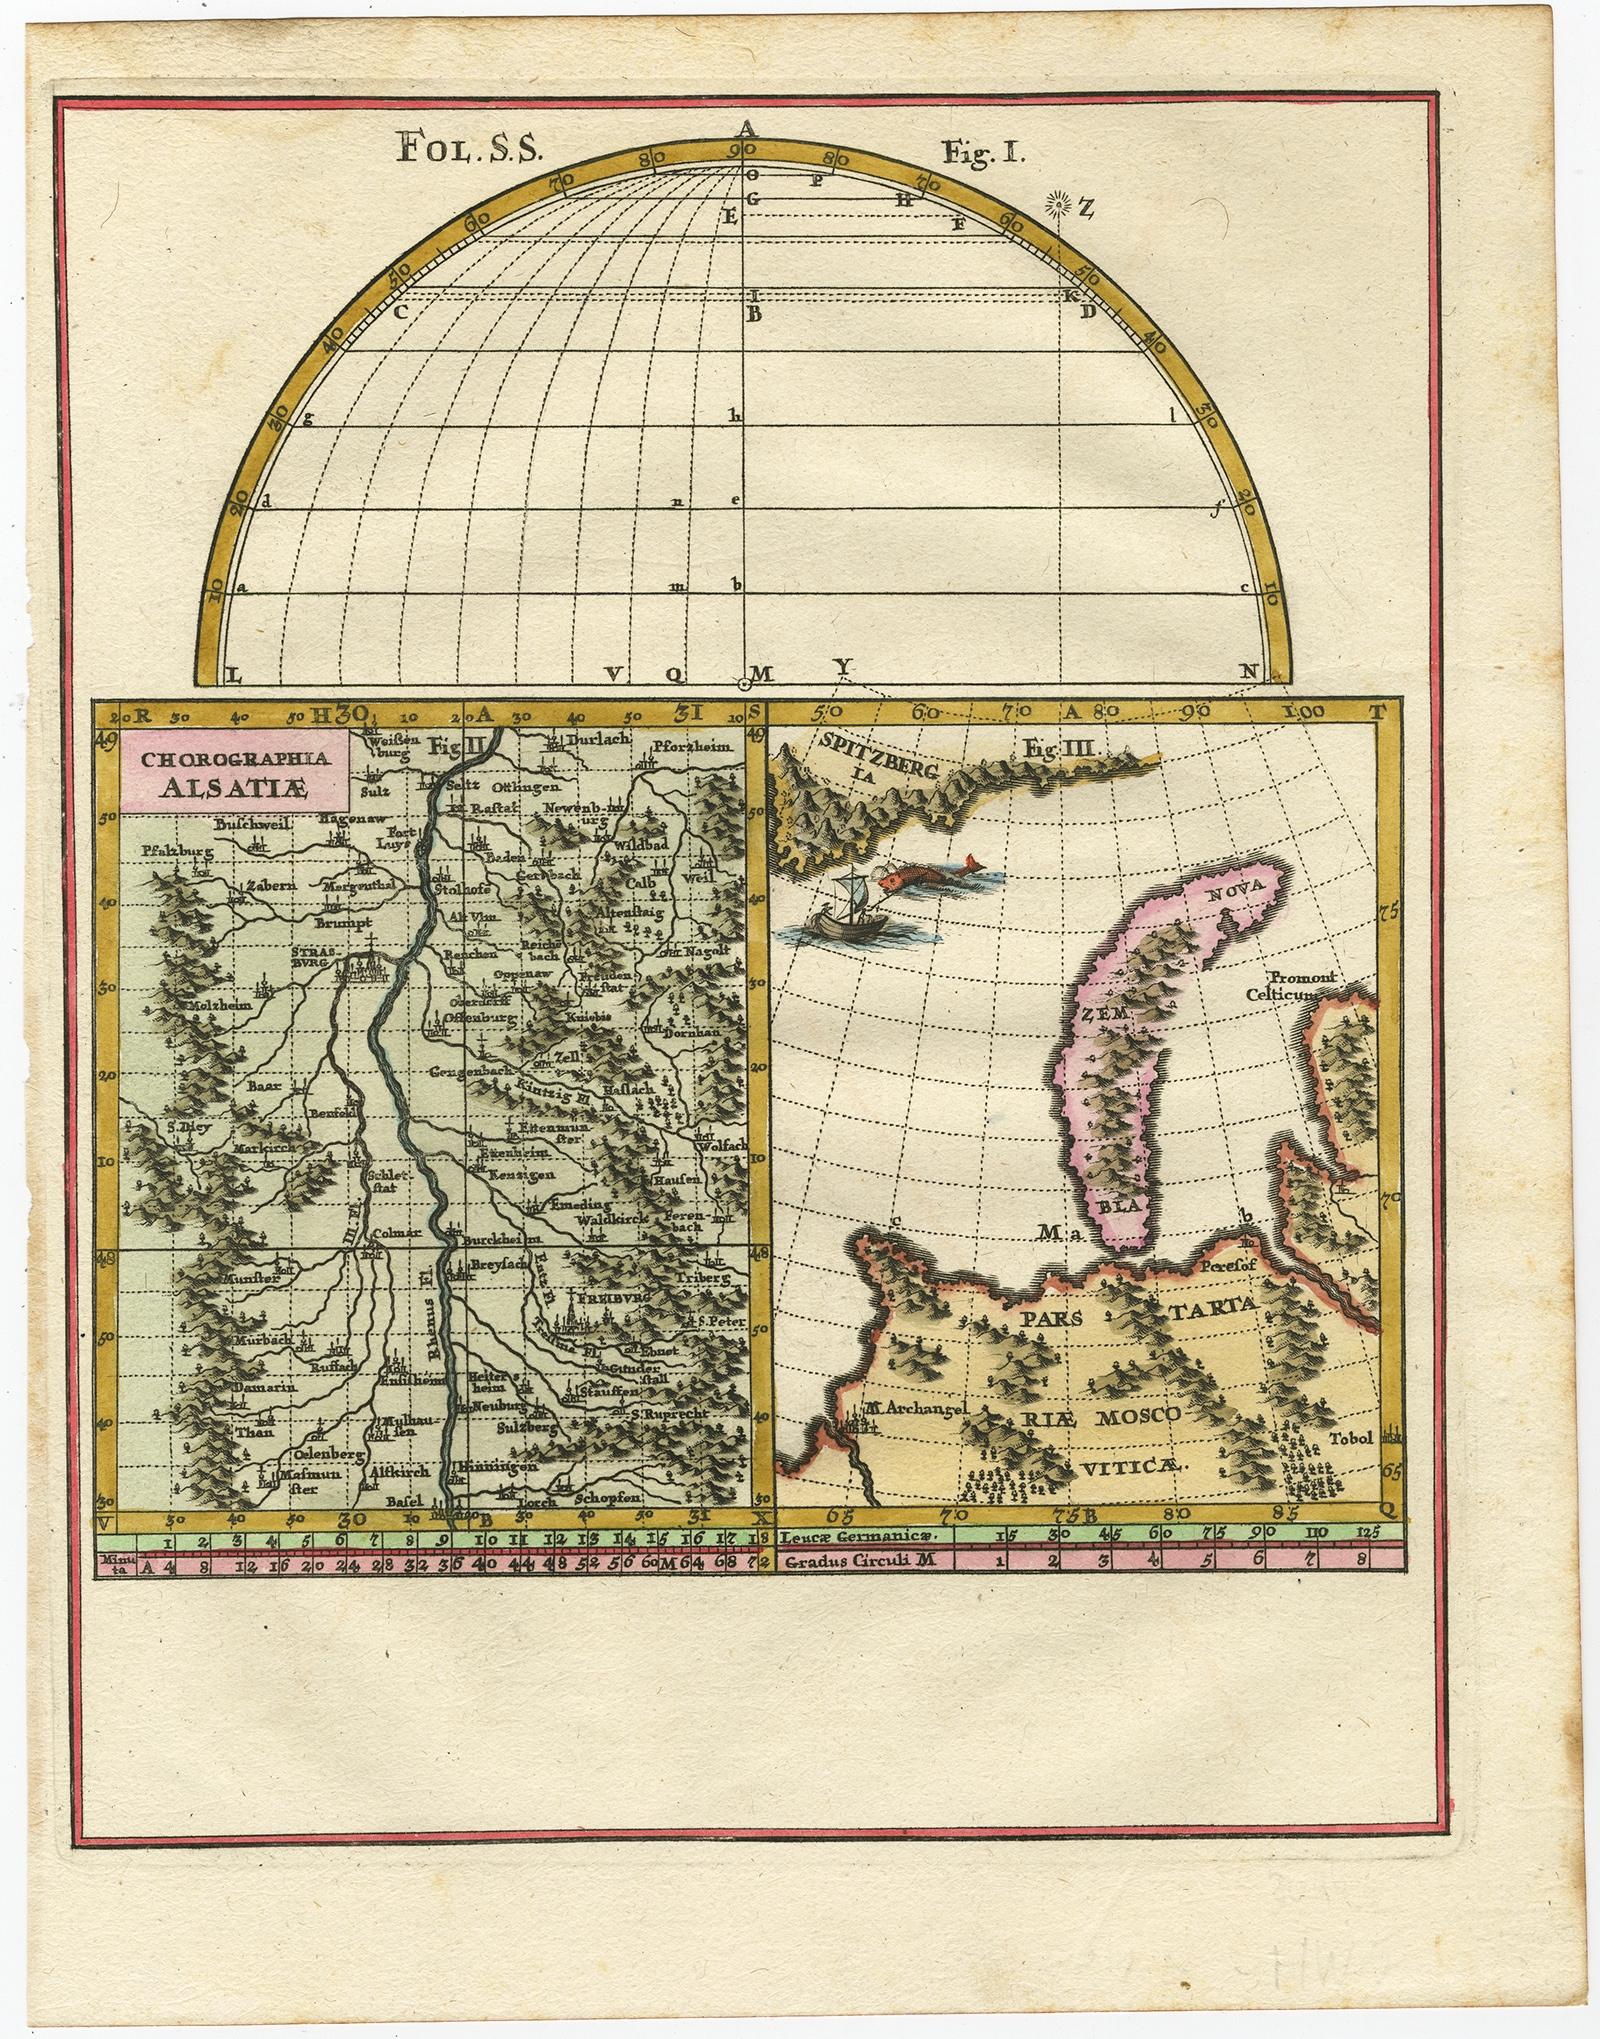 Antique map titled 'Chorographia Alsatiae.' 

Map of the Alsace region and Nova Zembla, printed for Scherer's 'Atlas Novus' (1702-1710). Scherer's 'Atlas Novus' forms an important milestone in the development of scientific and thematic